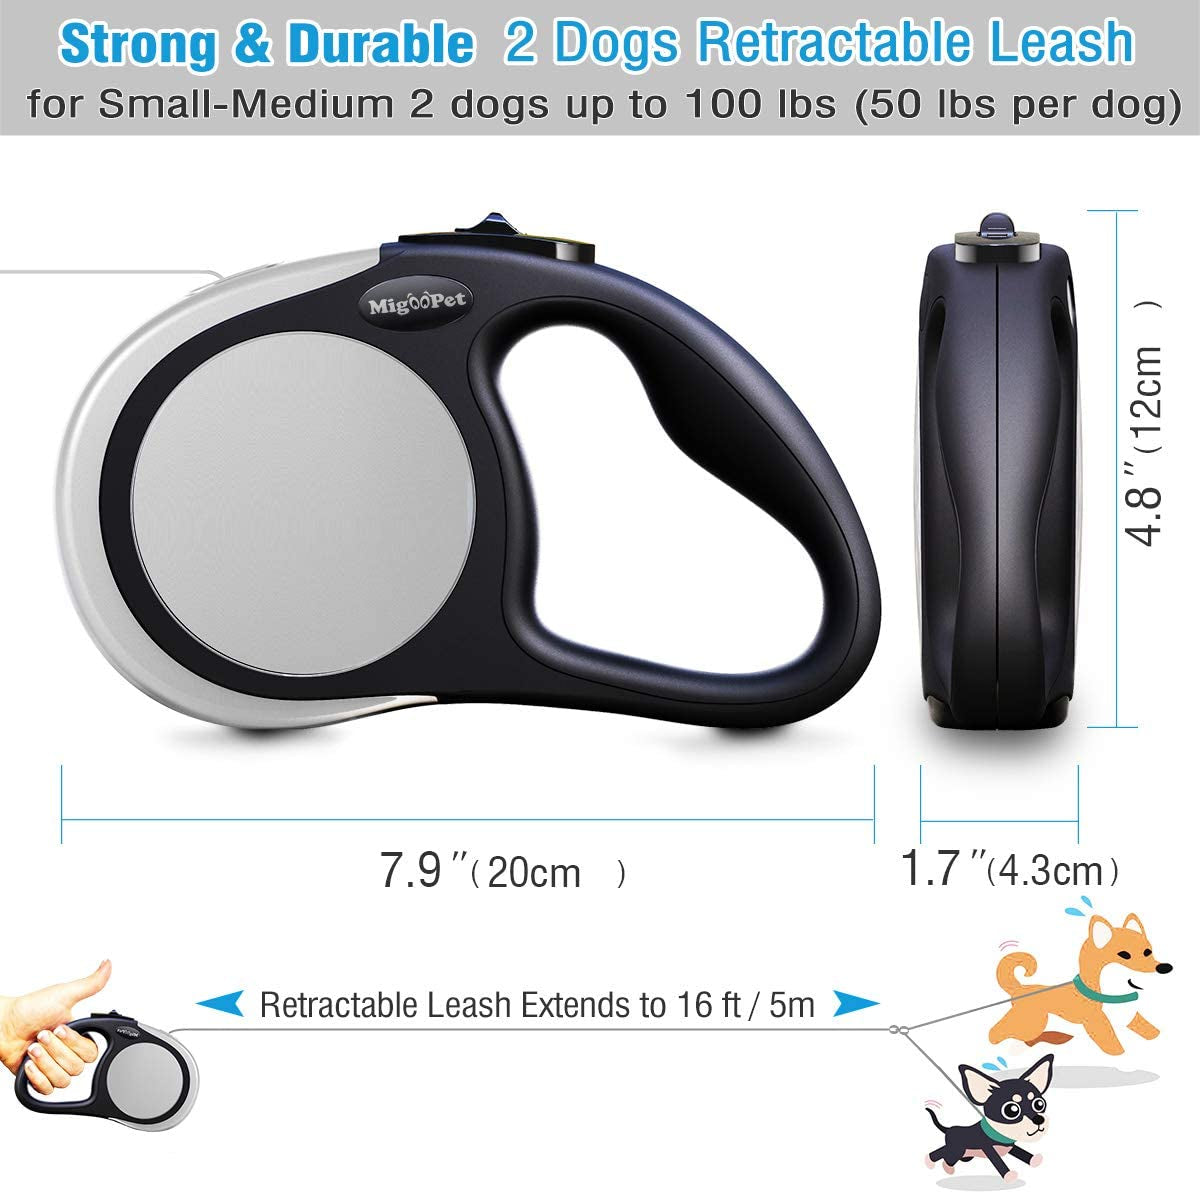 Double Retractable Dog Leash for Two Dogs up to 50 Lbs per Dog - 16 Ft Coupler Dog Leashes for Small Medium Dogs - One Locked System, Non Slip Grip, Tangle Free